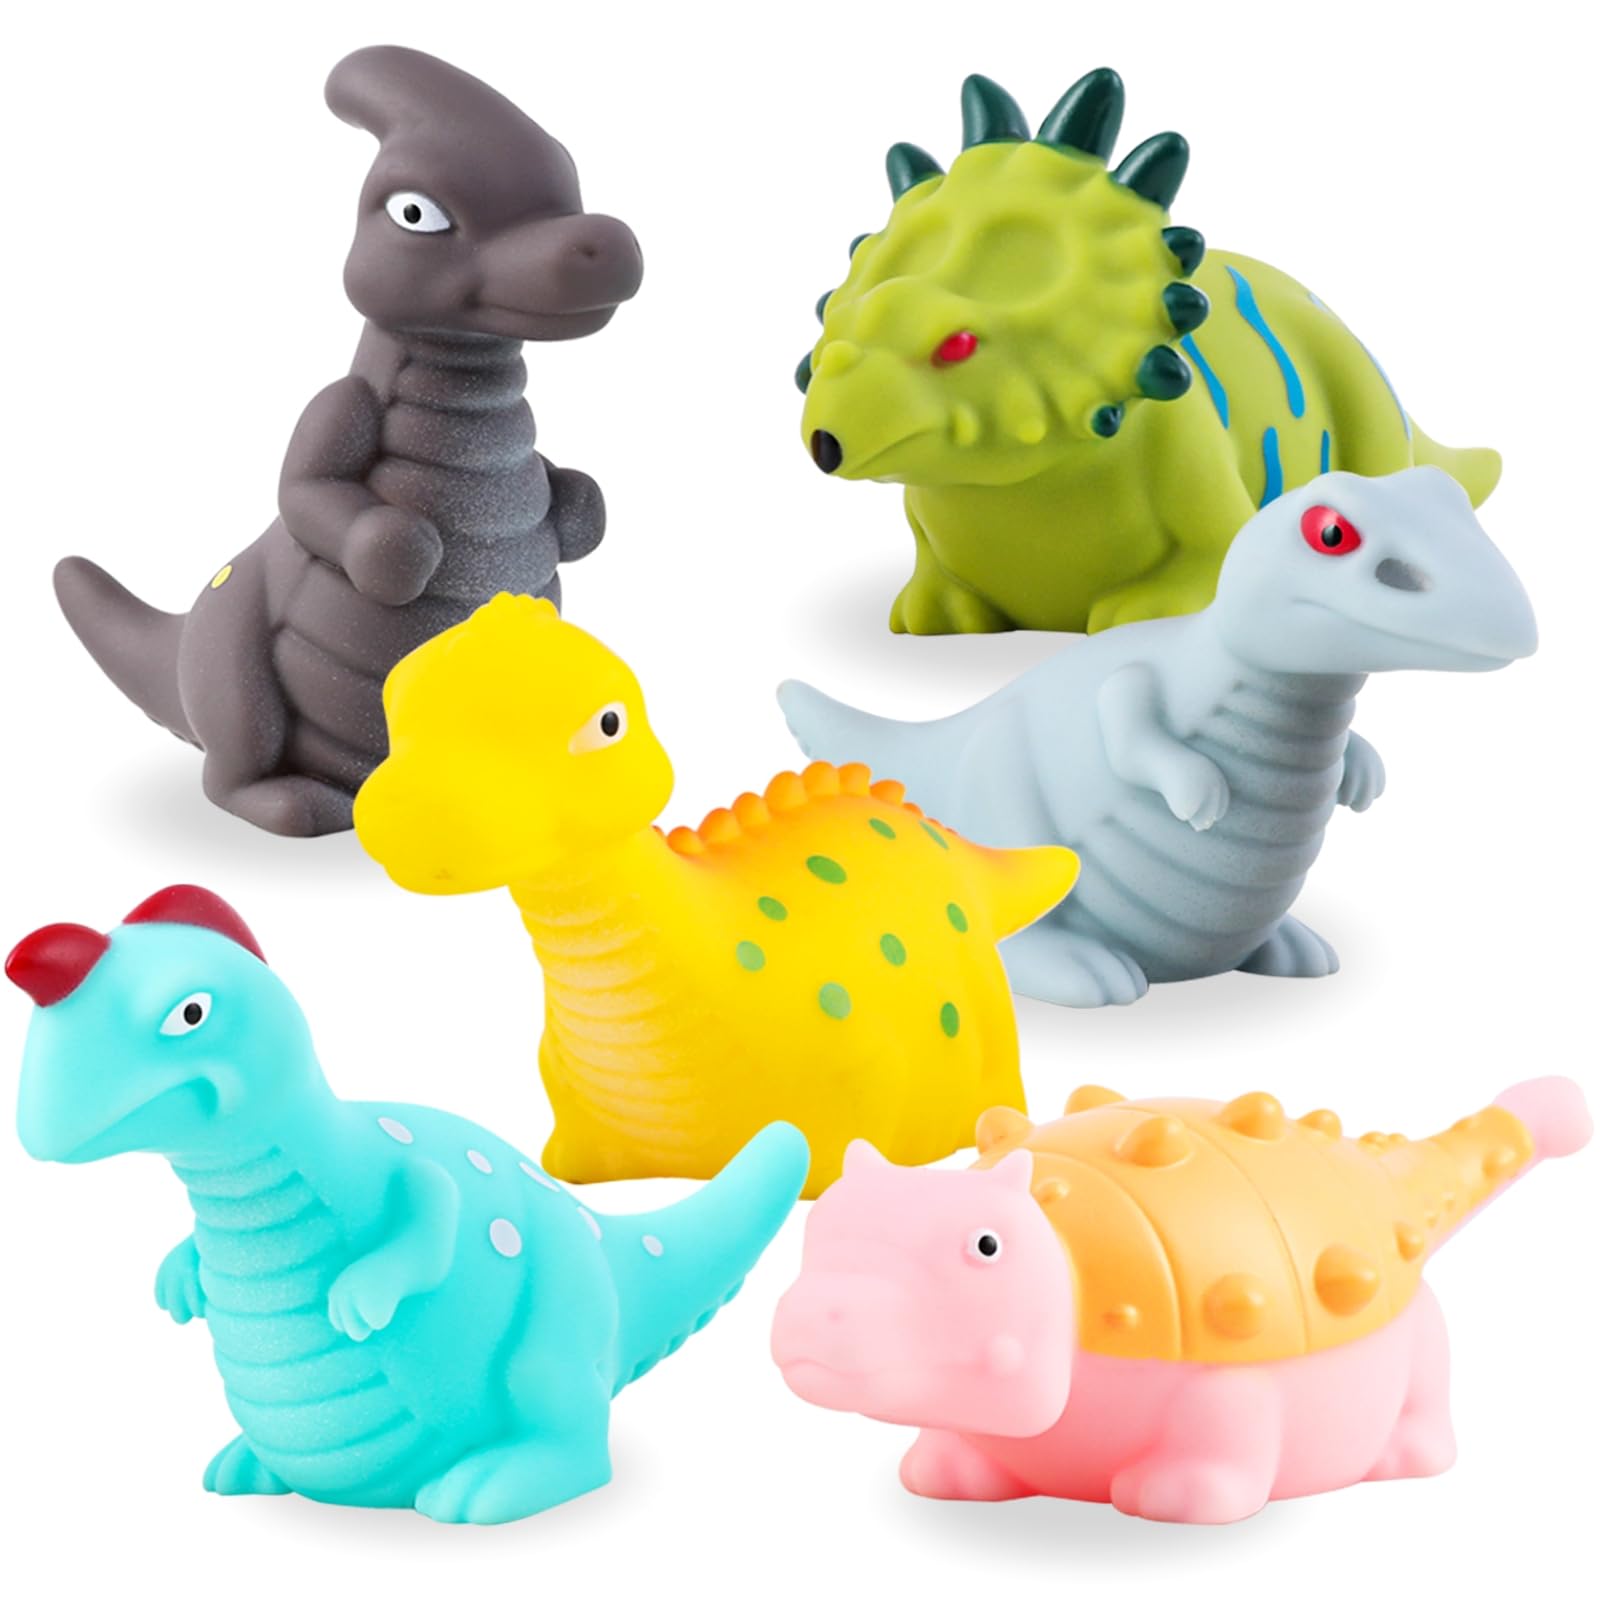 Mold Free Dinosaur Bath Toys for Toddlers/ Infants/ Babies, No Hole No Mold Bathtub Toys (6 Pcs with Storage Bag)